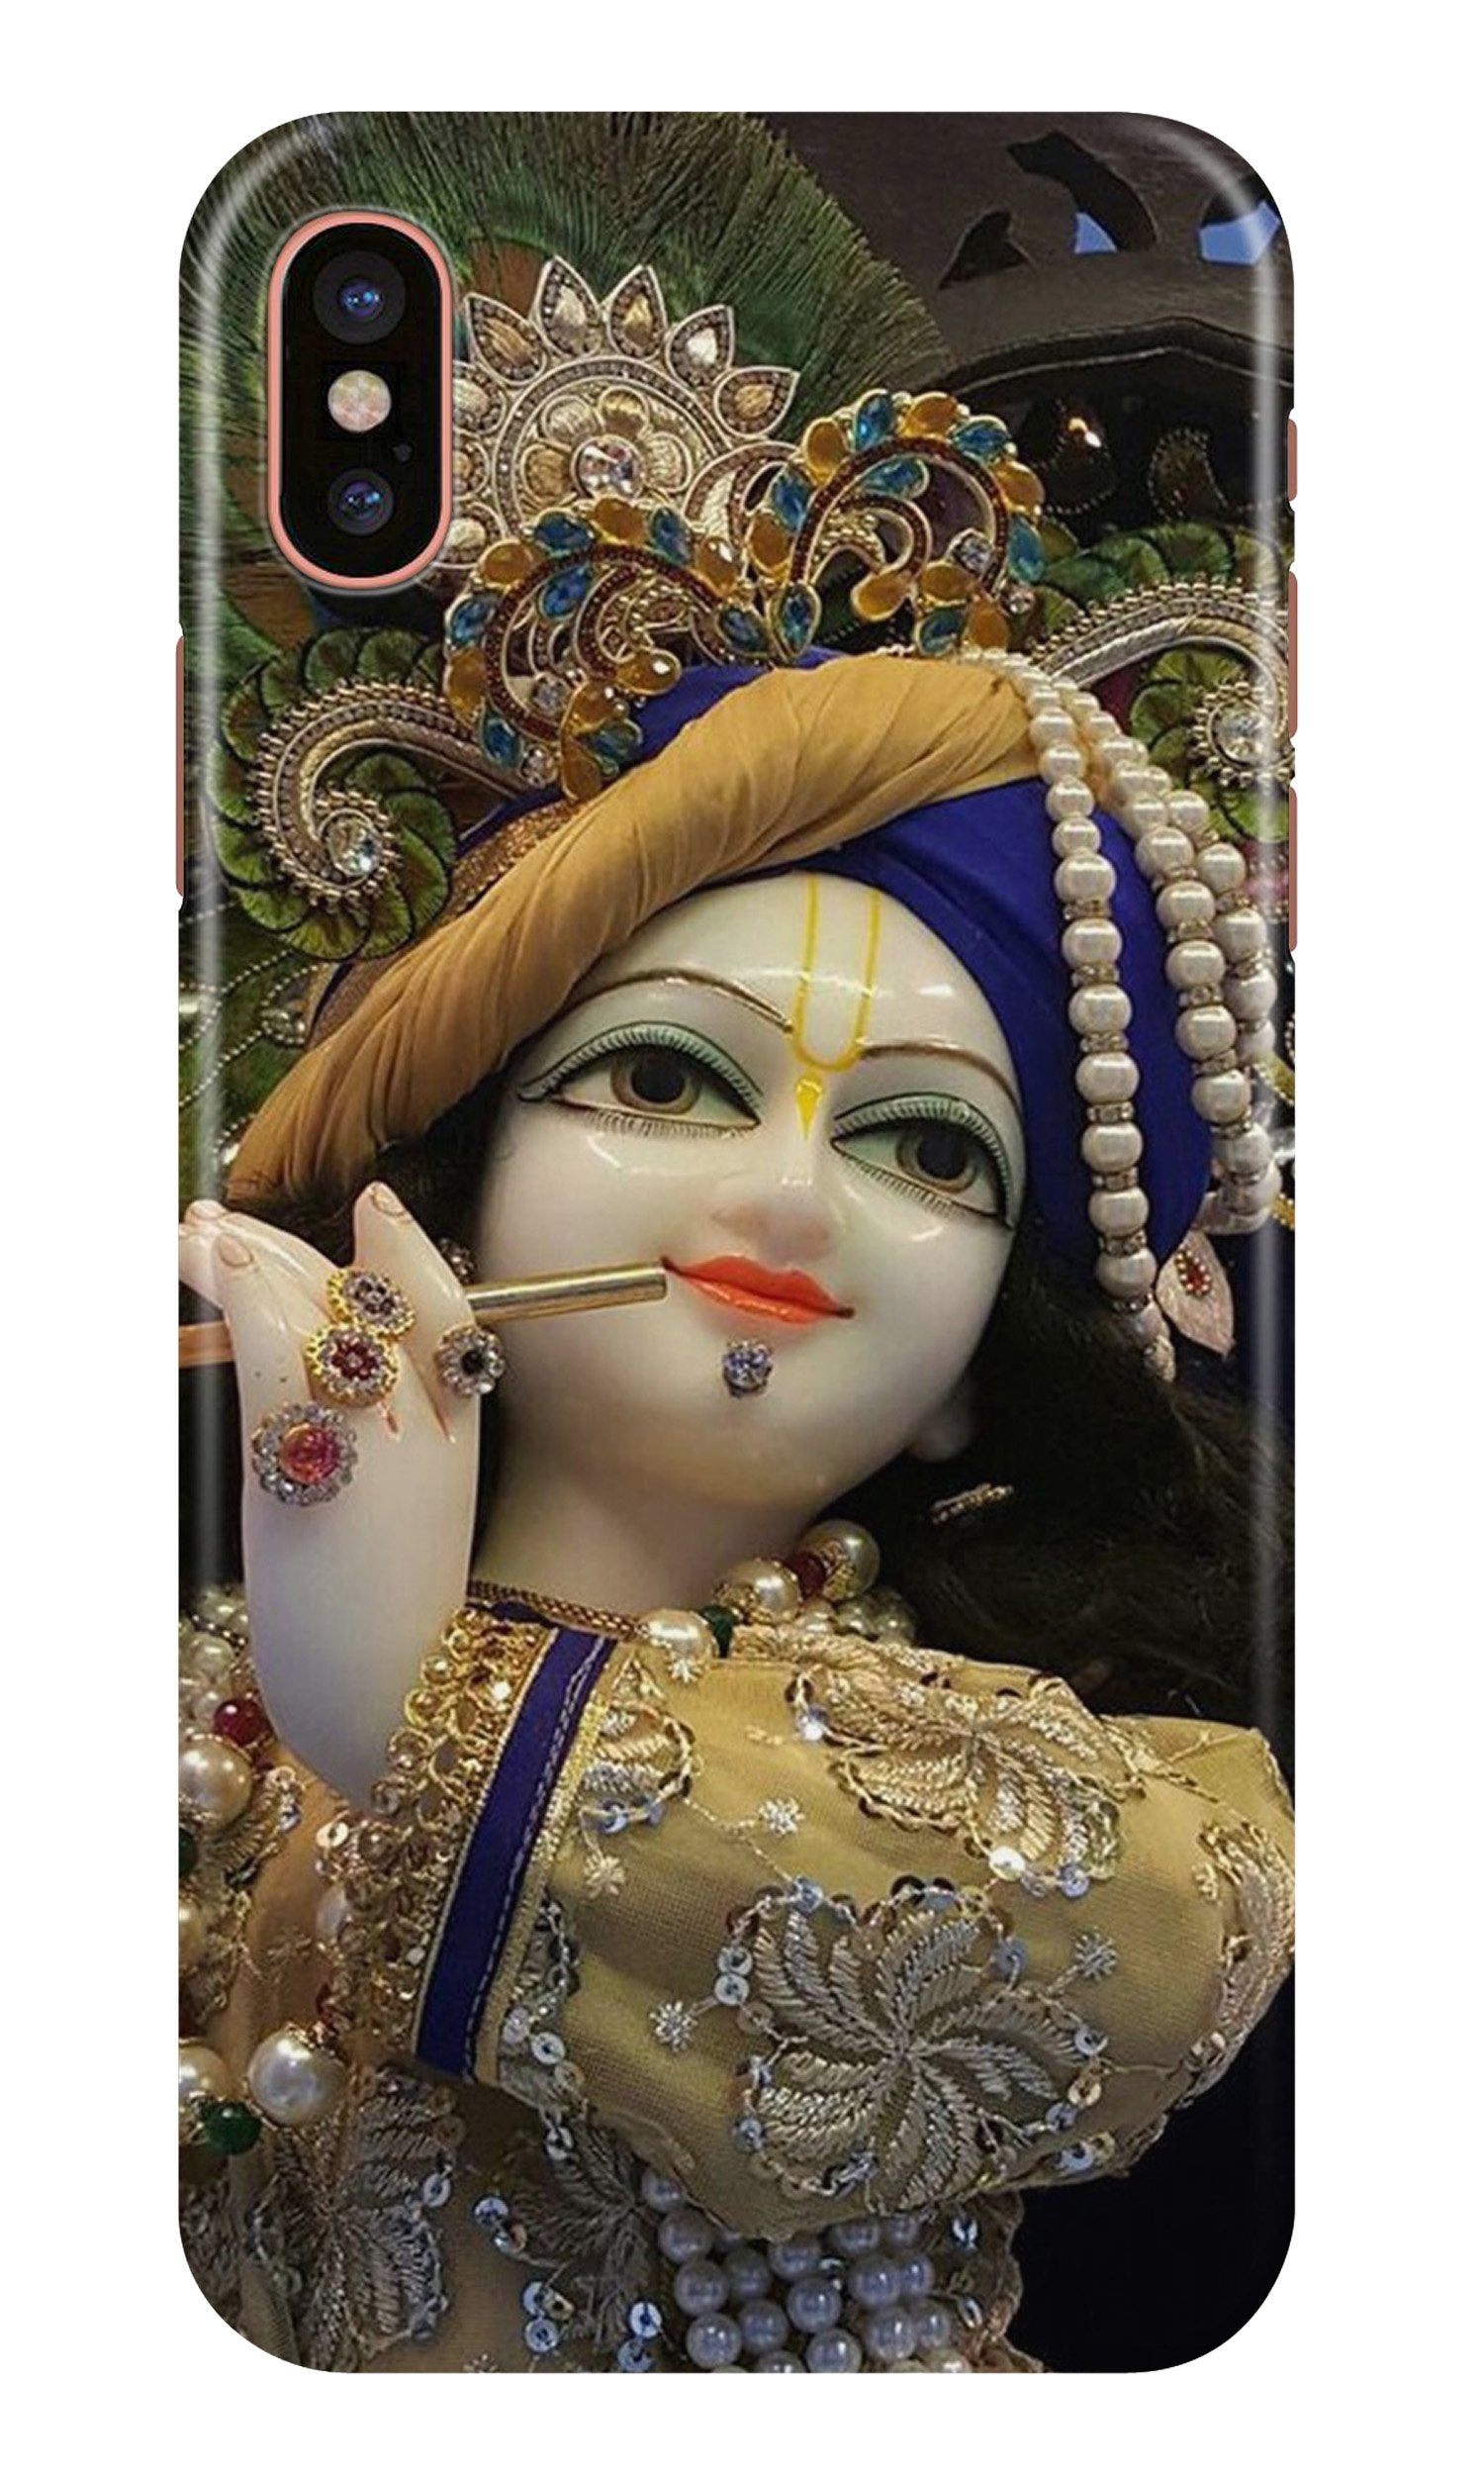 Lord Krishna3 Case for iPhone X